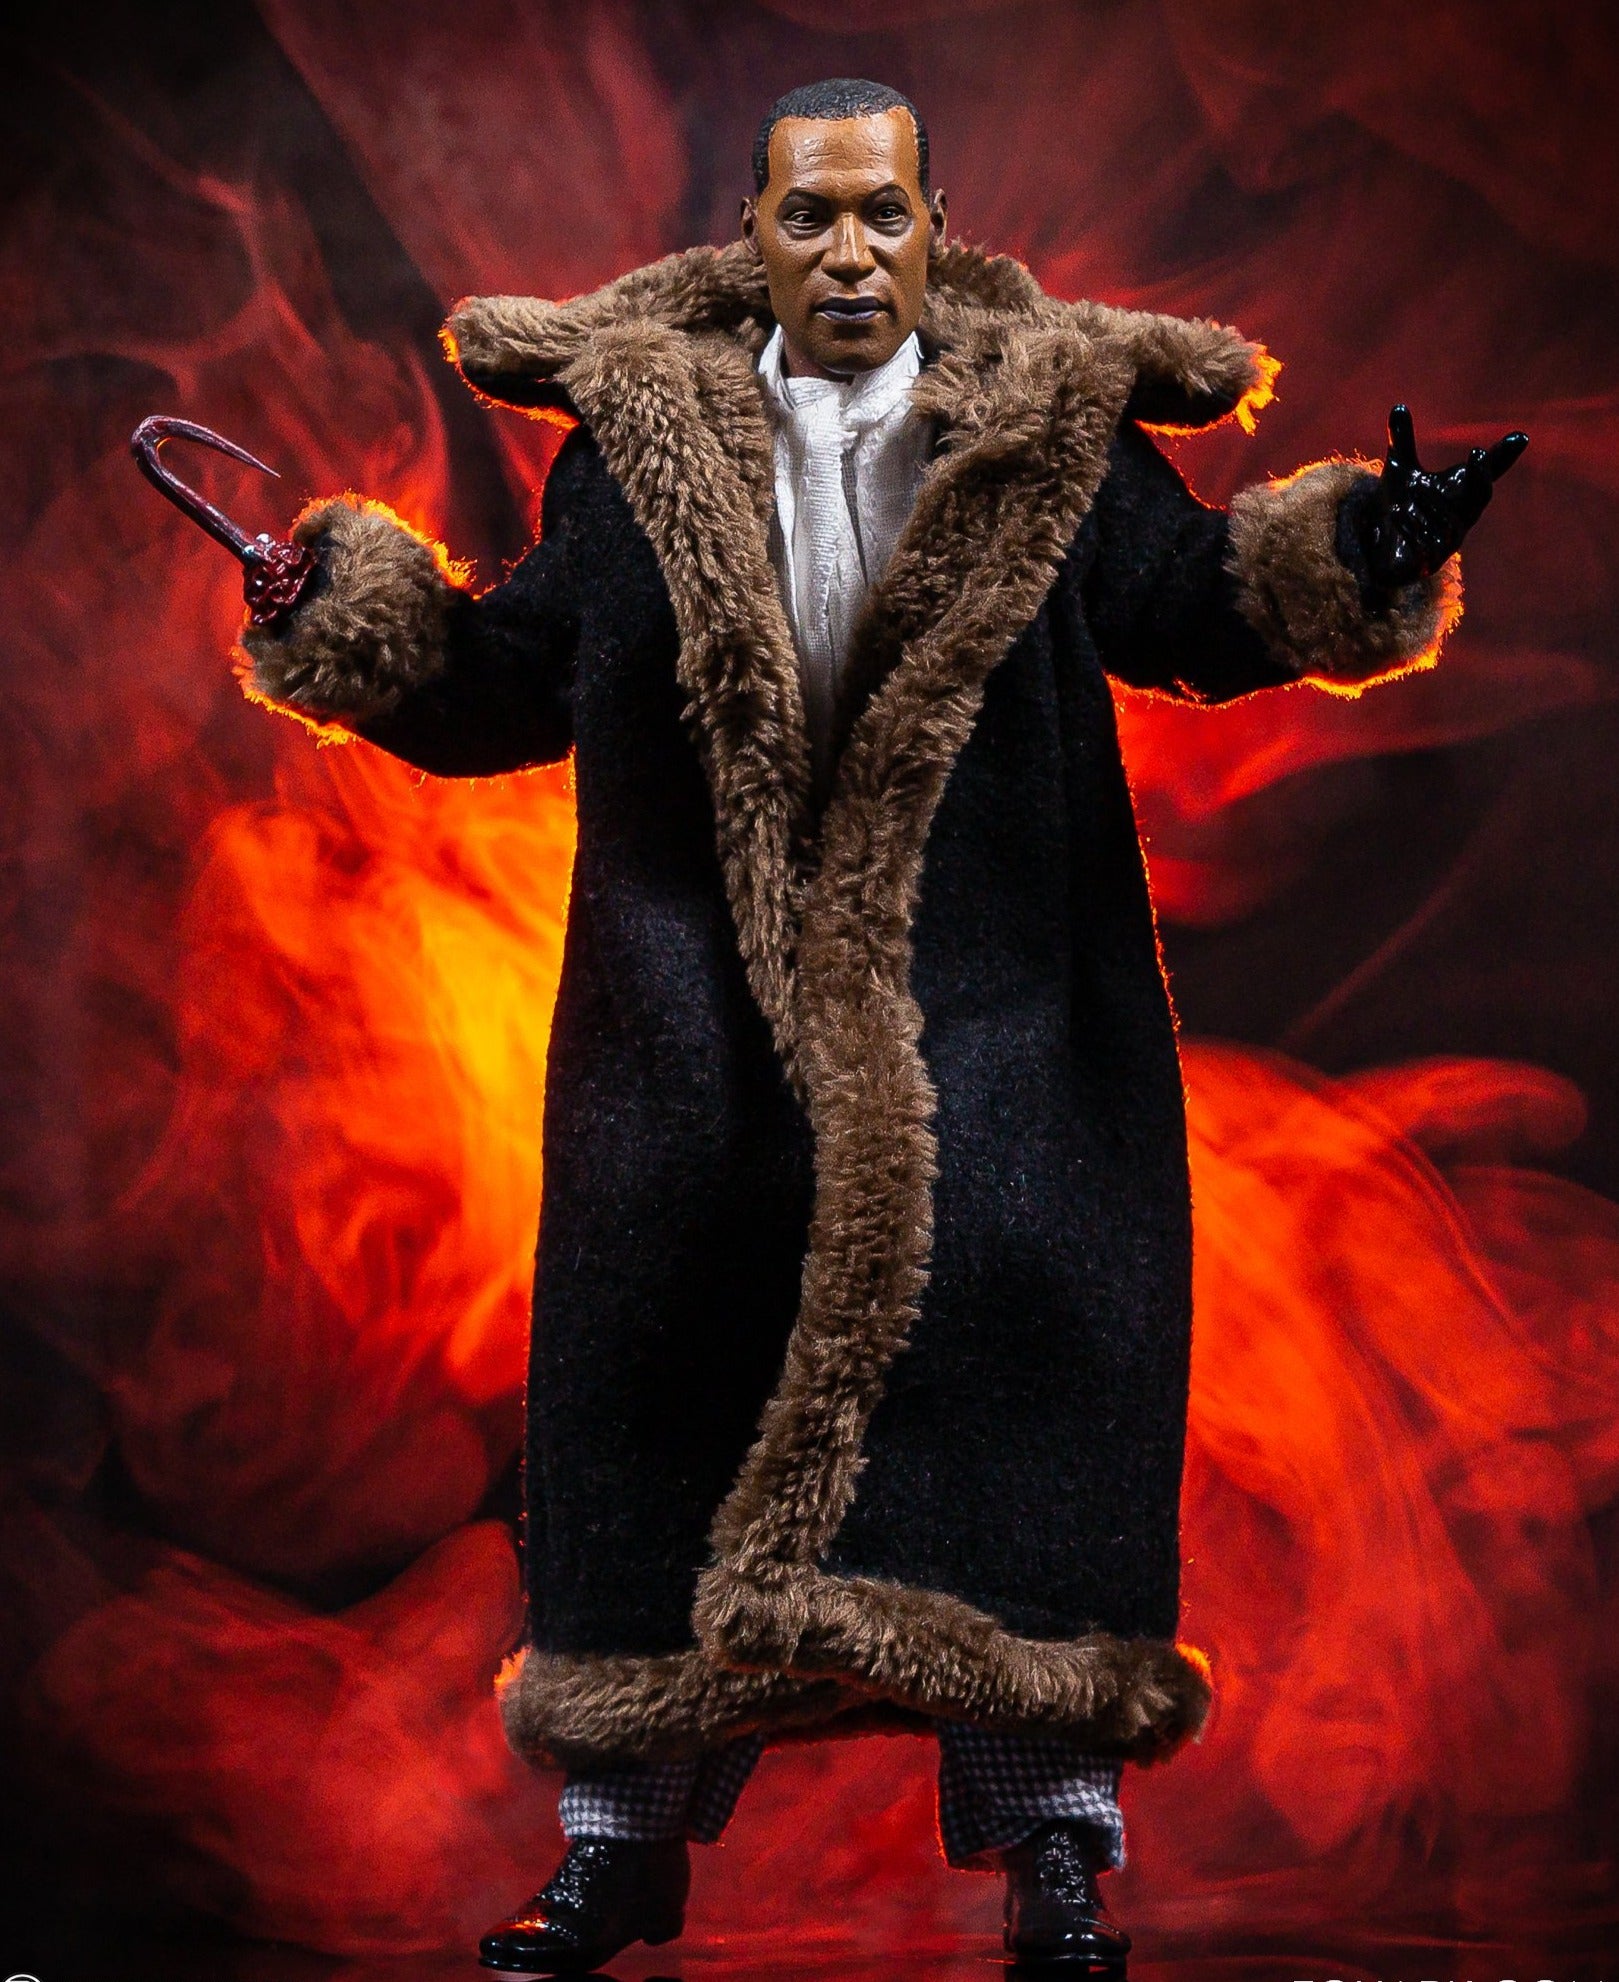 NECA - Candyman - 8" Clothed Action Figure - Candyman - Collectors Row Inc.